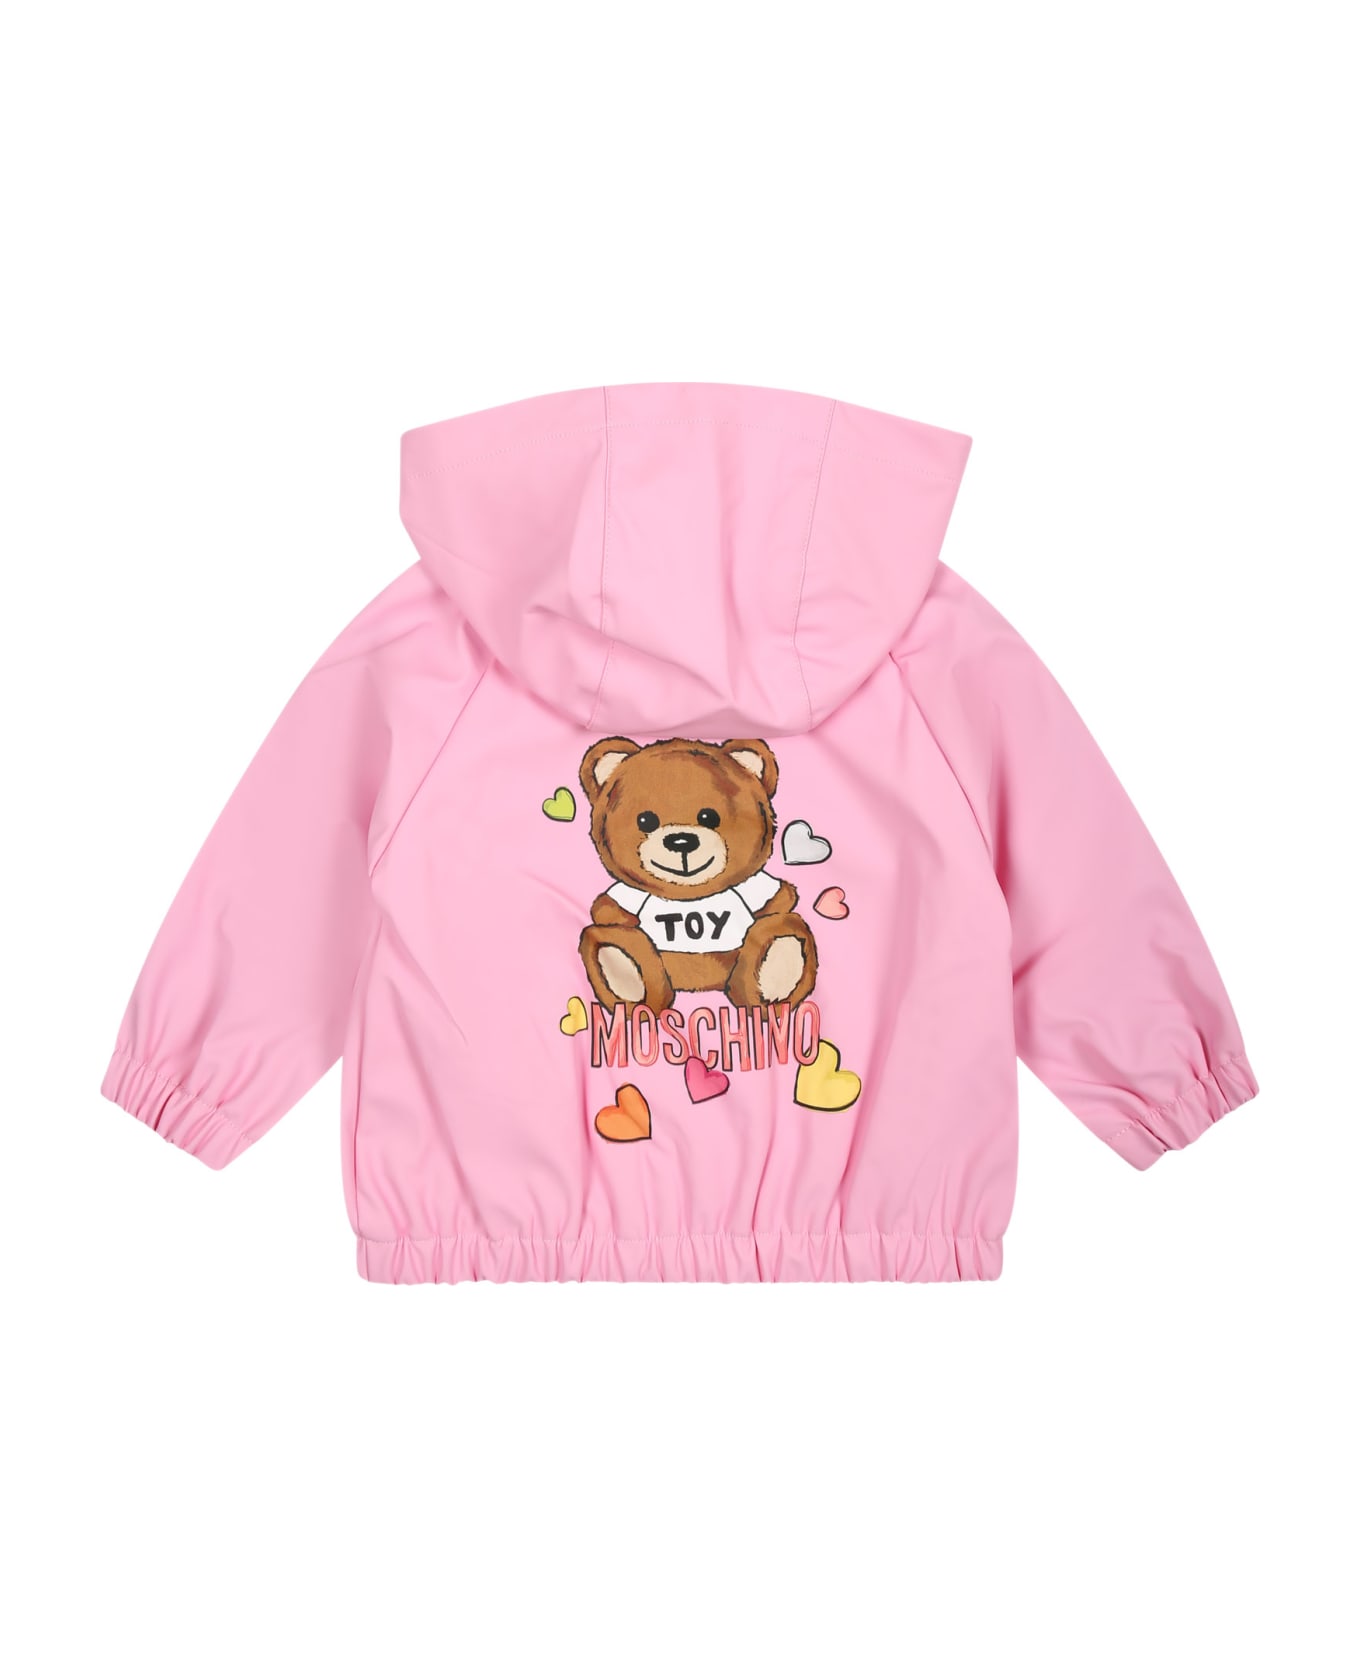 Moschino Pink Windbreaker For Baby Girl With Teddy Bear - Pink